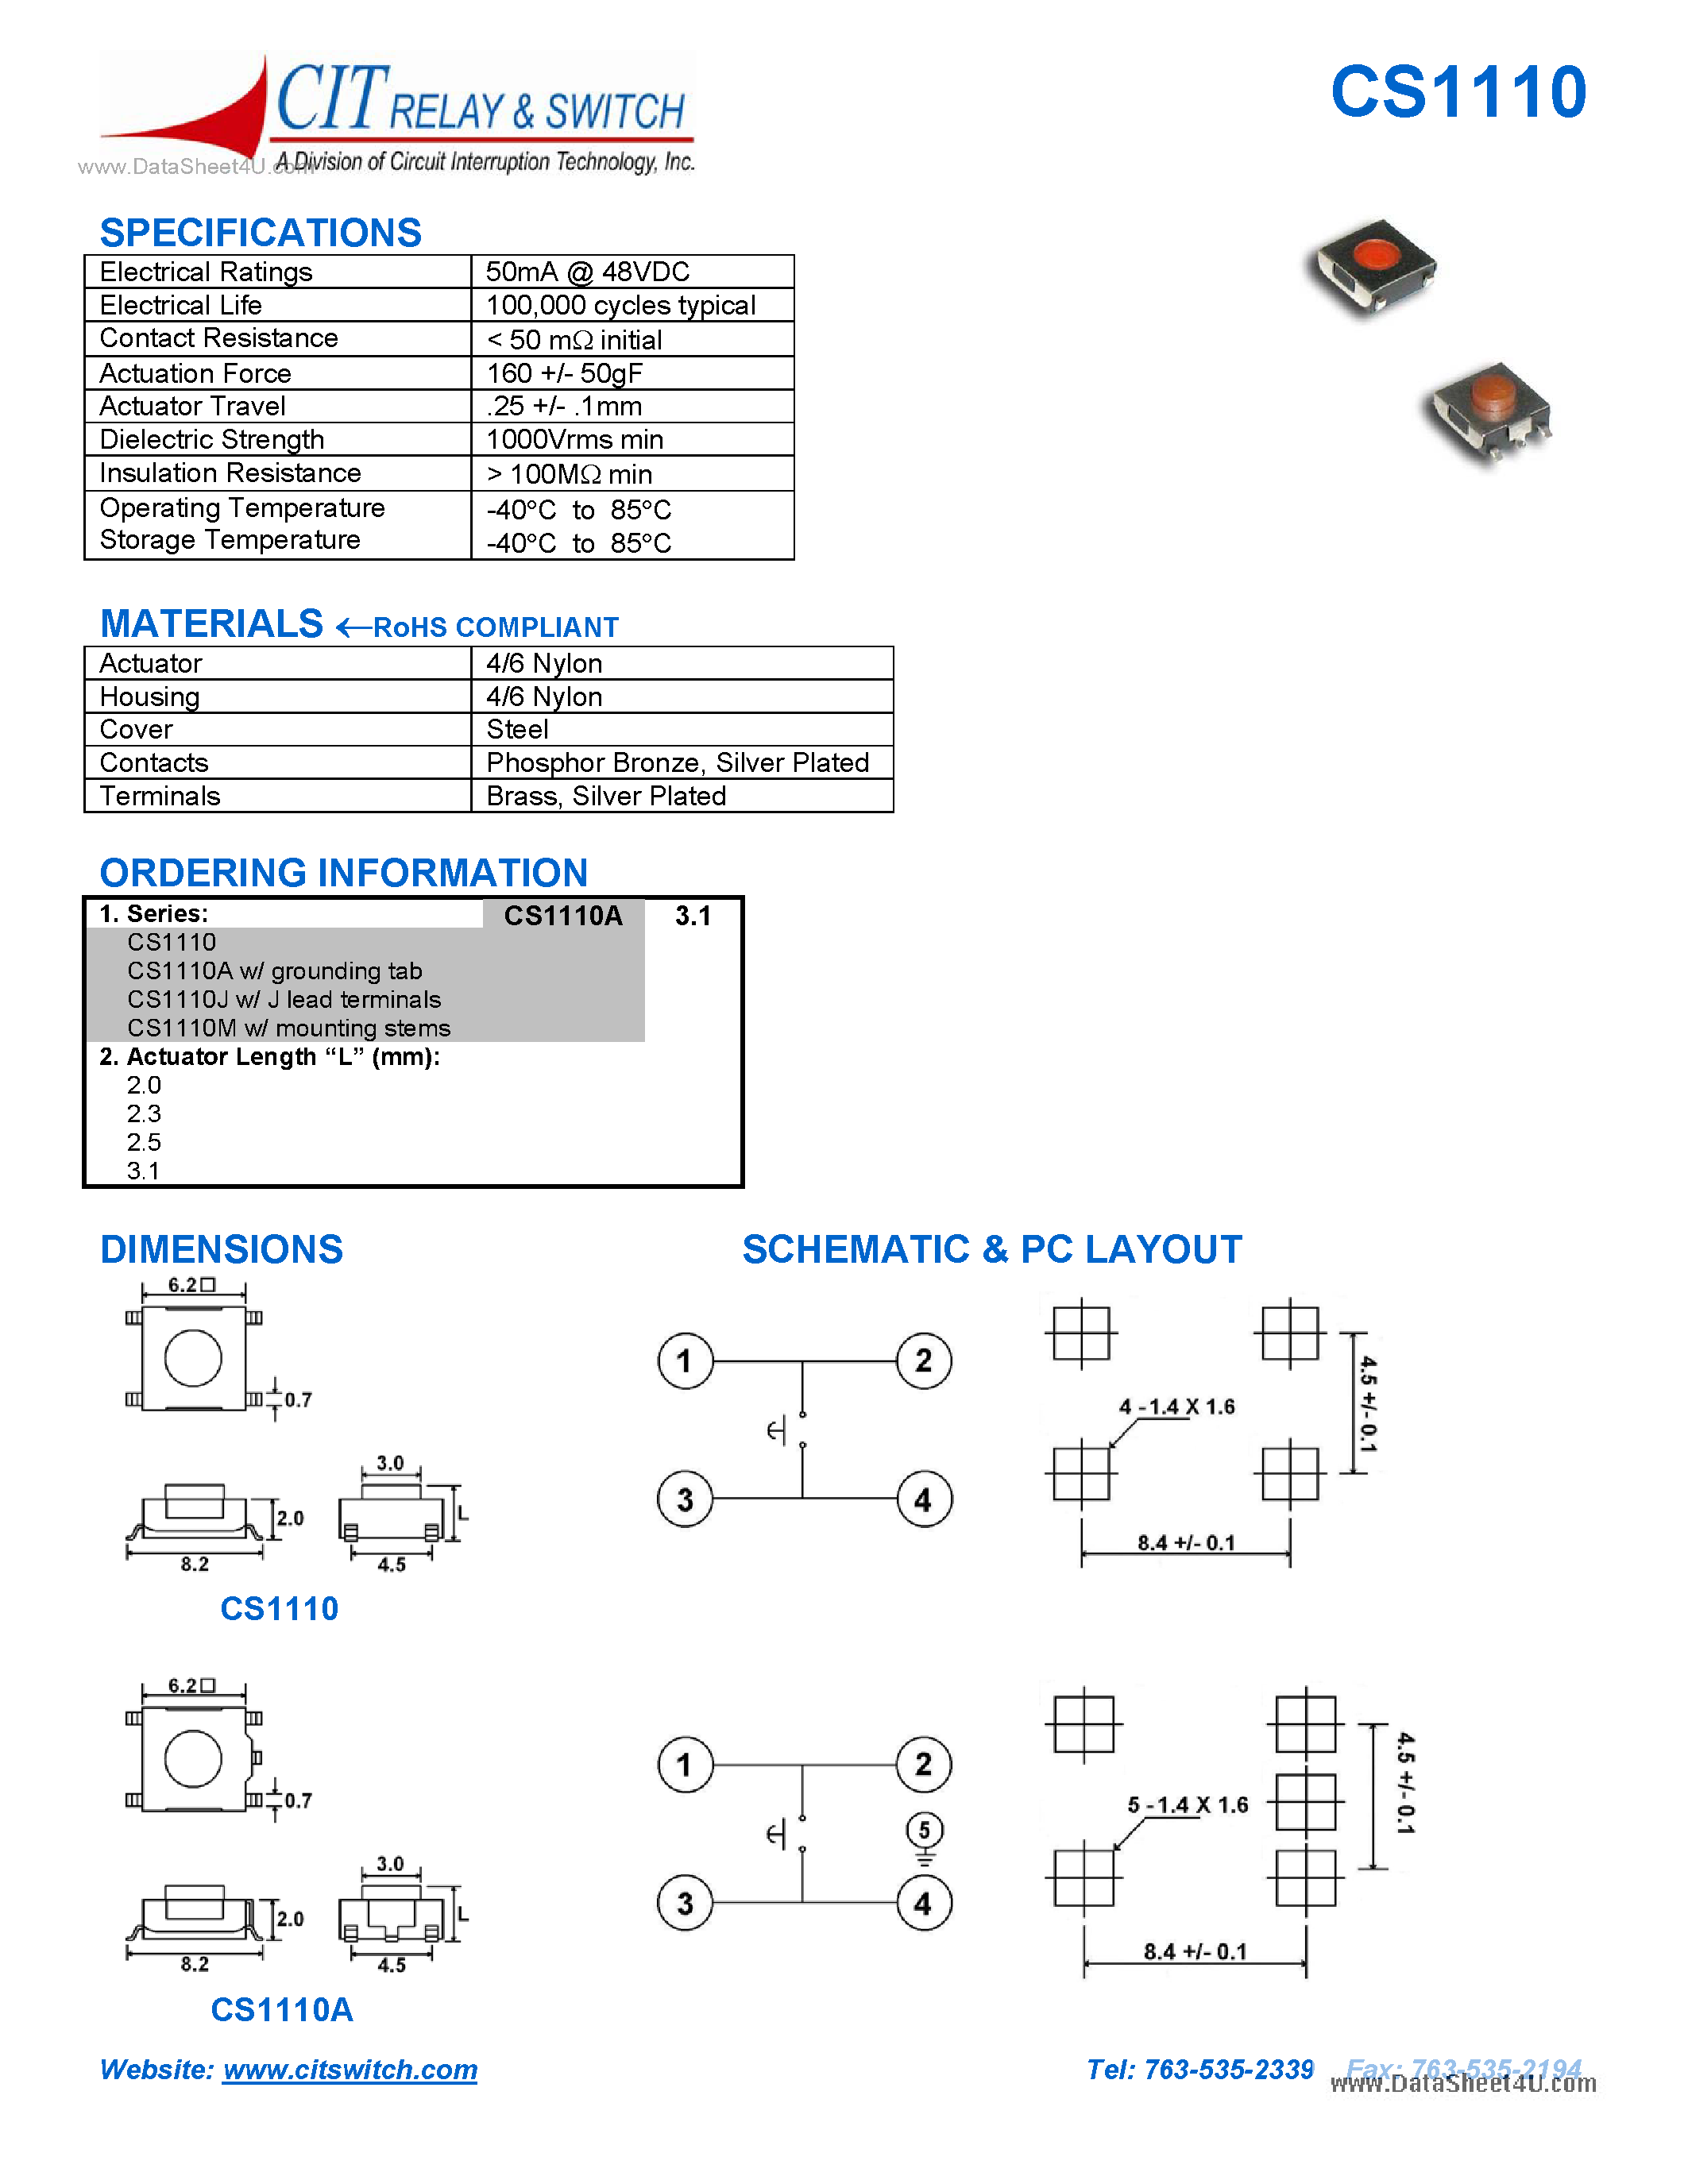 Datasheet CS1110 - DIMENSIONS SCHEMATIC & PC LAYOUT page 1